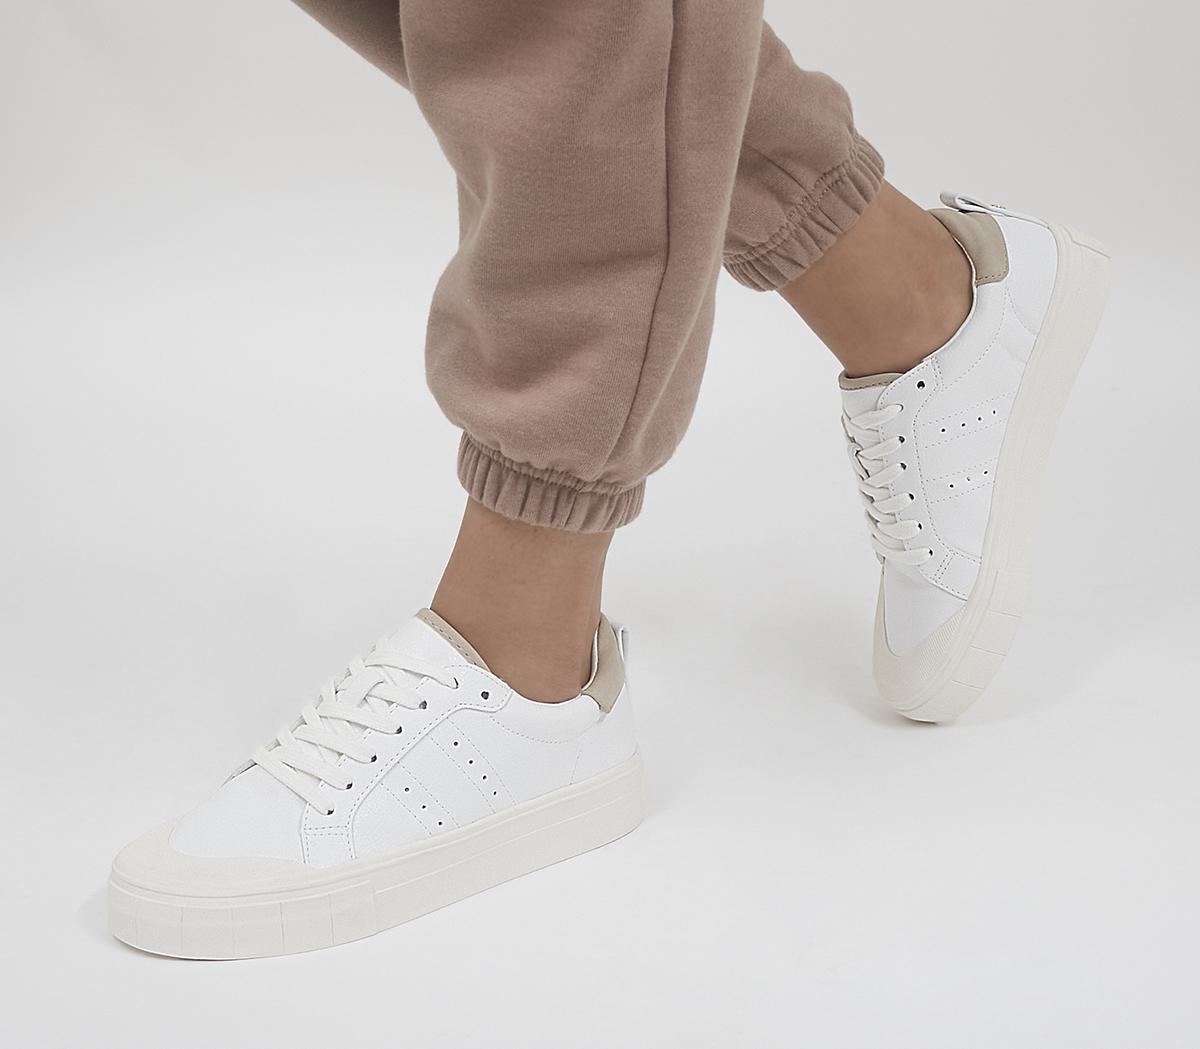 Floating Textured Sole Flatform Up Trainers    Rubber